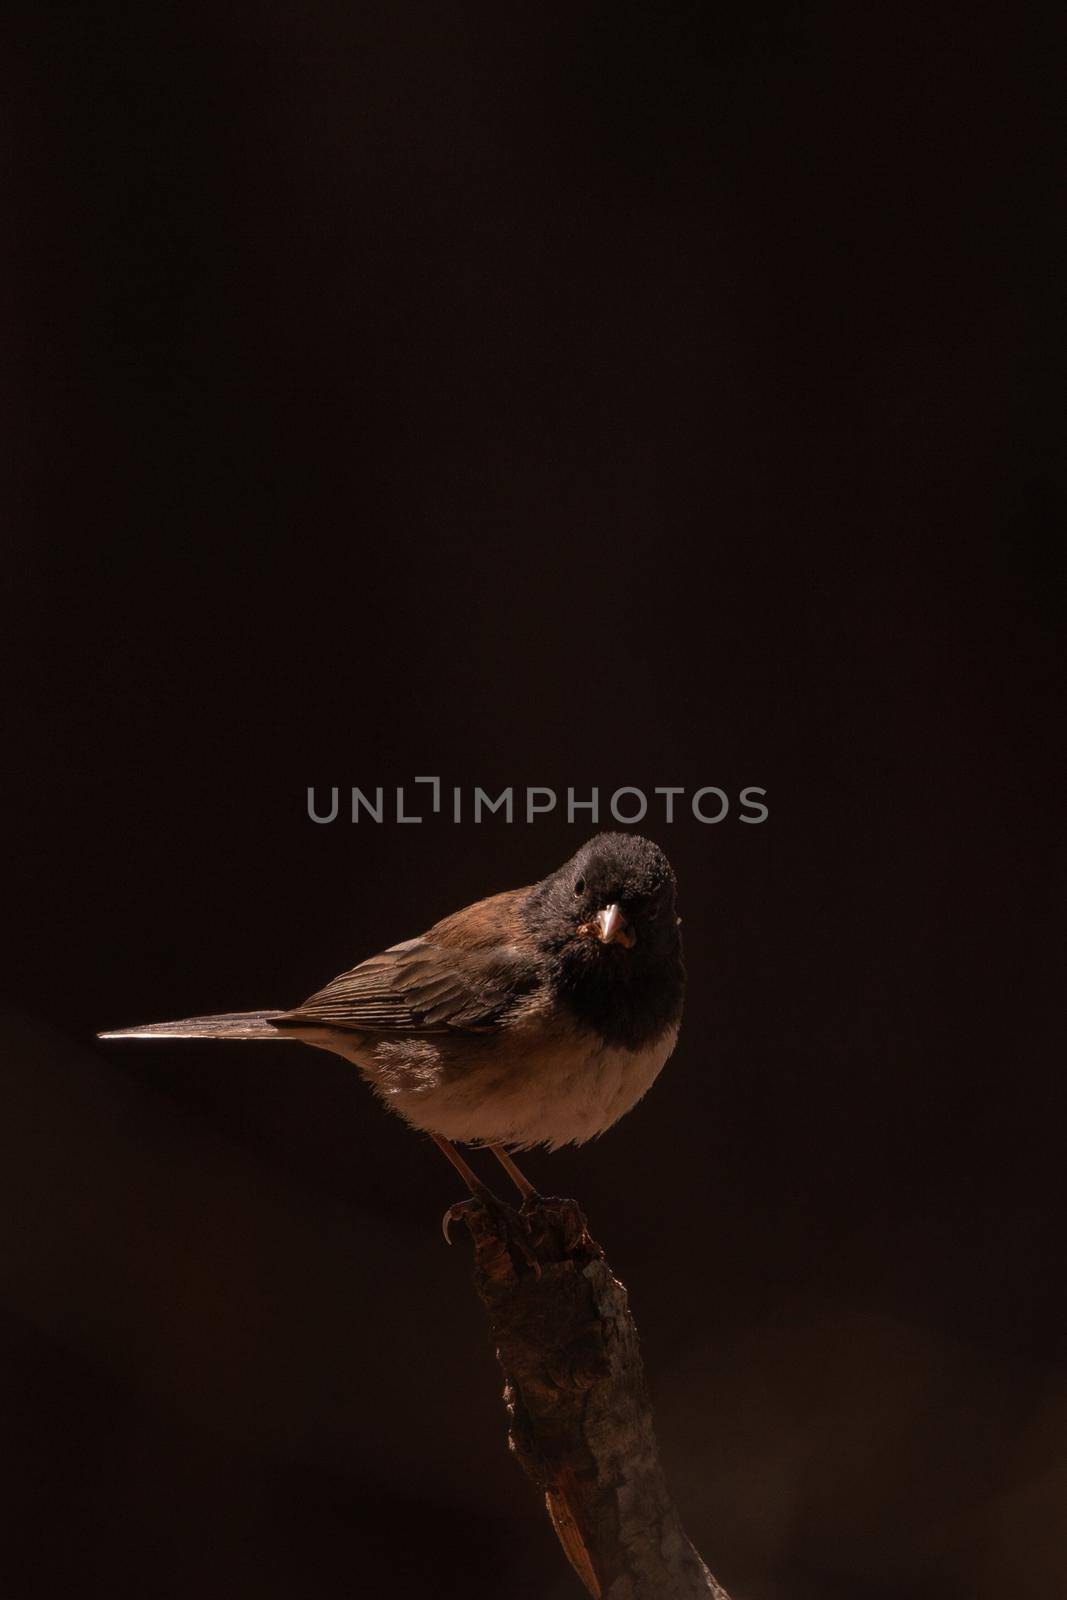 Dark-eyed junco sitting on a branch staring out with a black background by Granchinho